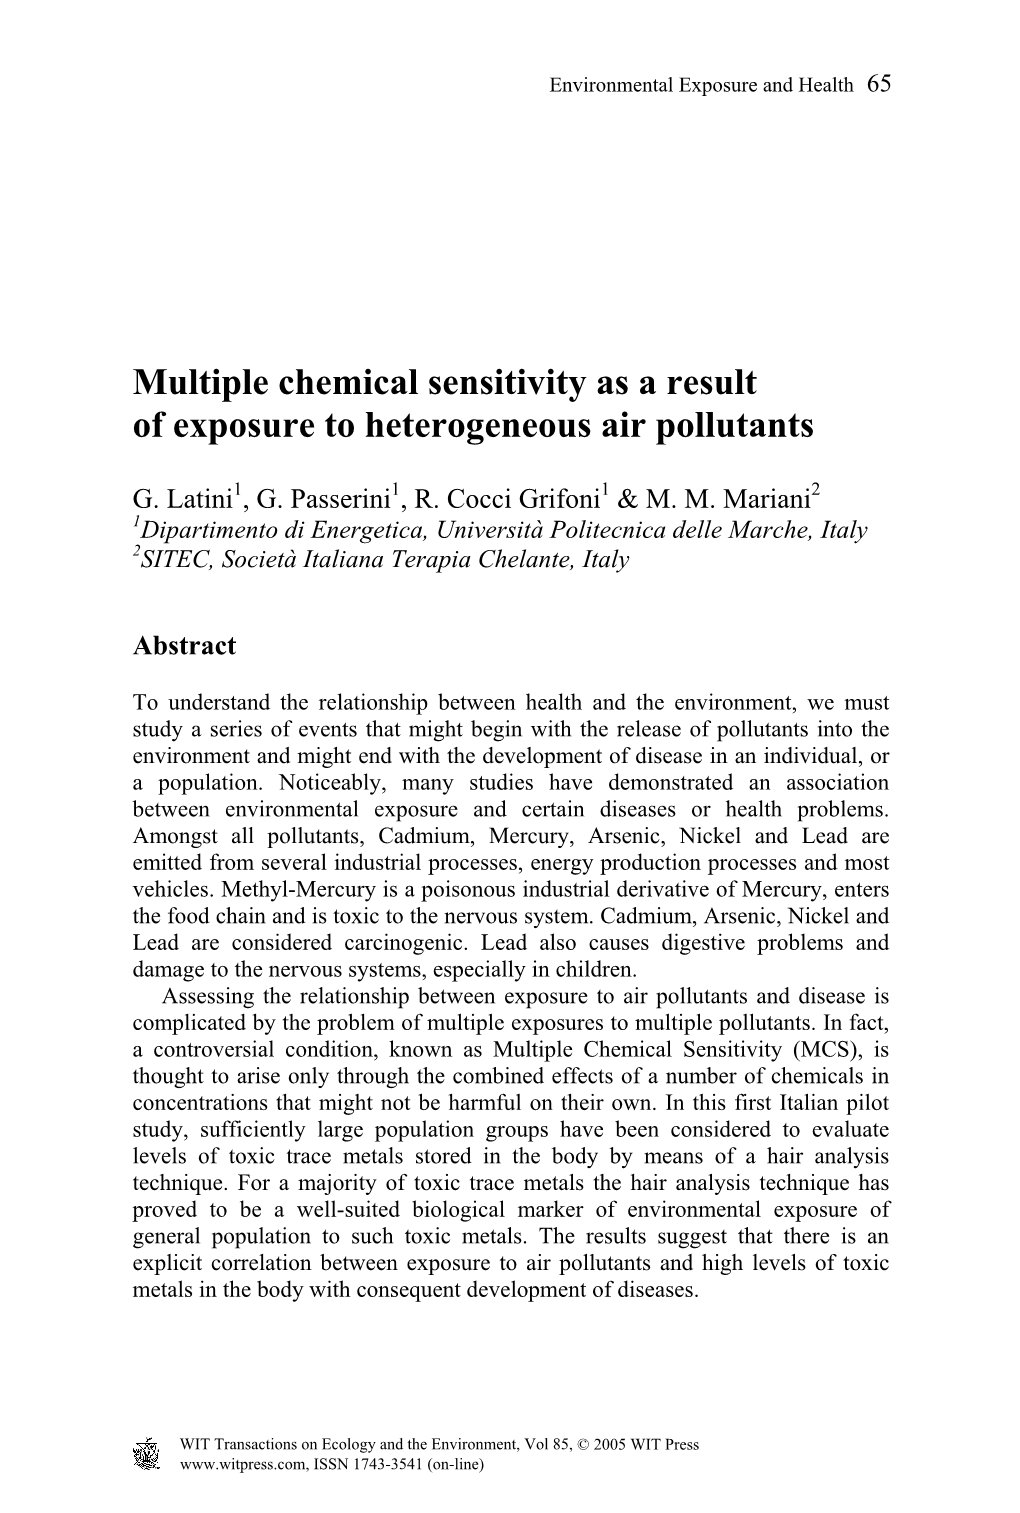 Multiple Chemical Sensitivity As a Result of Exposure to Heterogeneous Air Pollutants